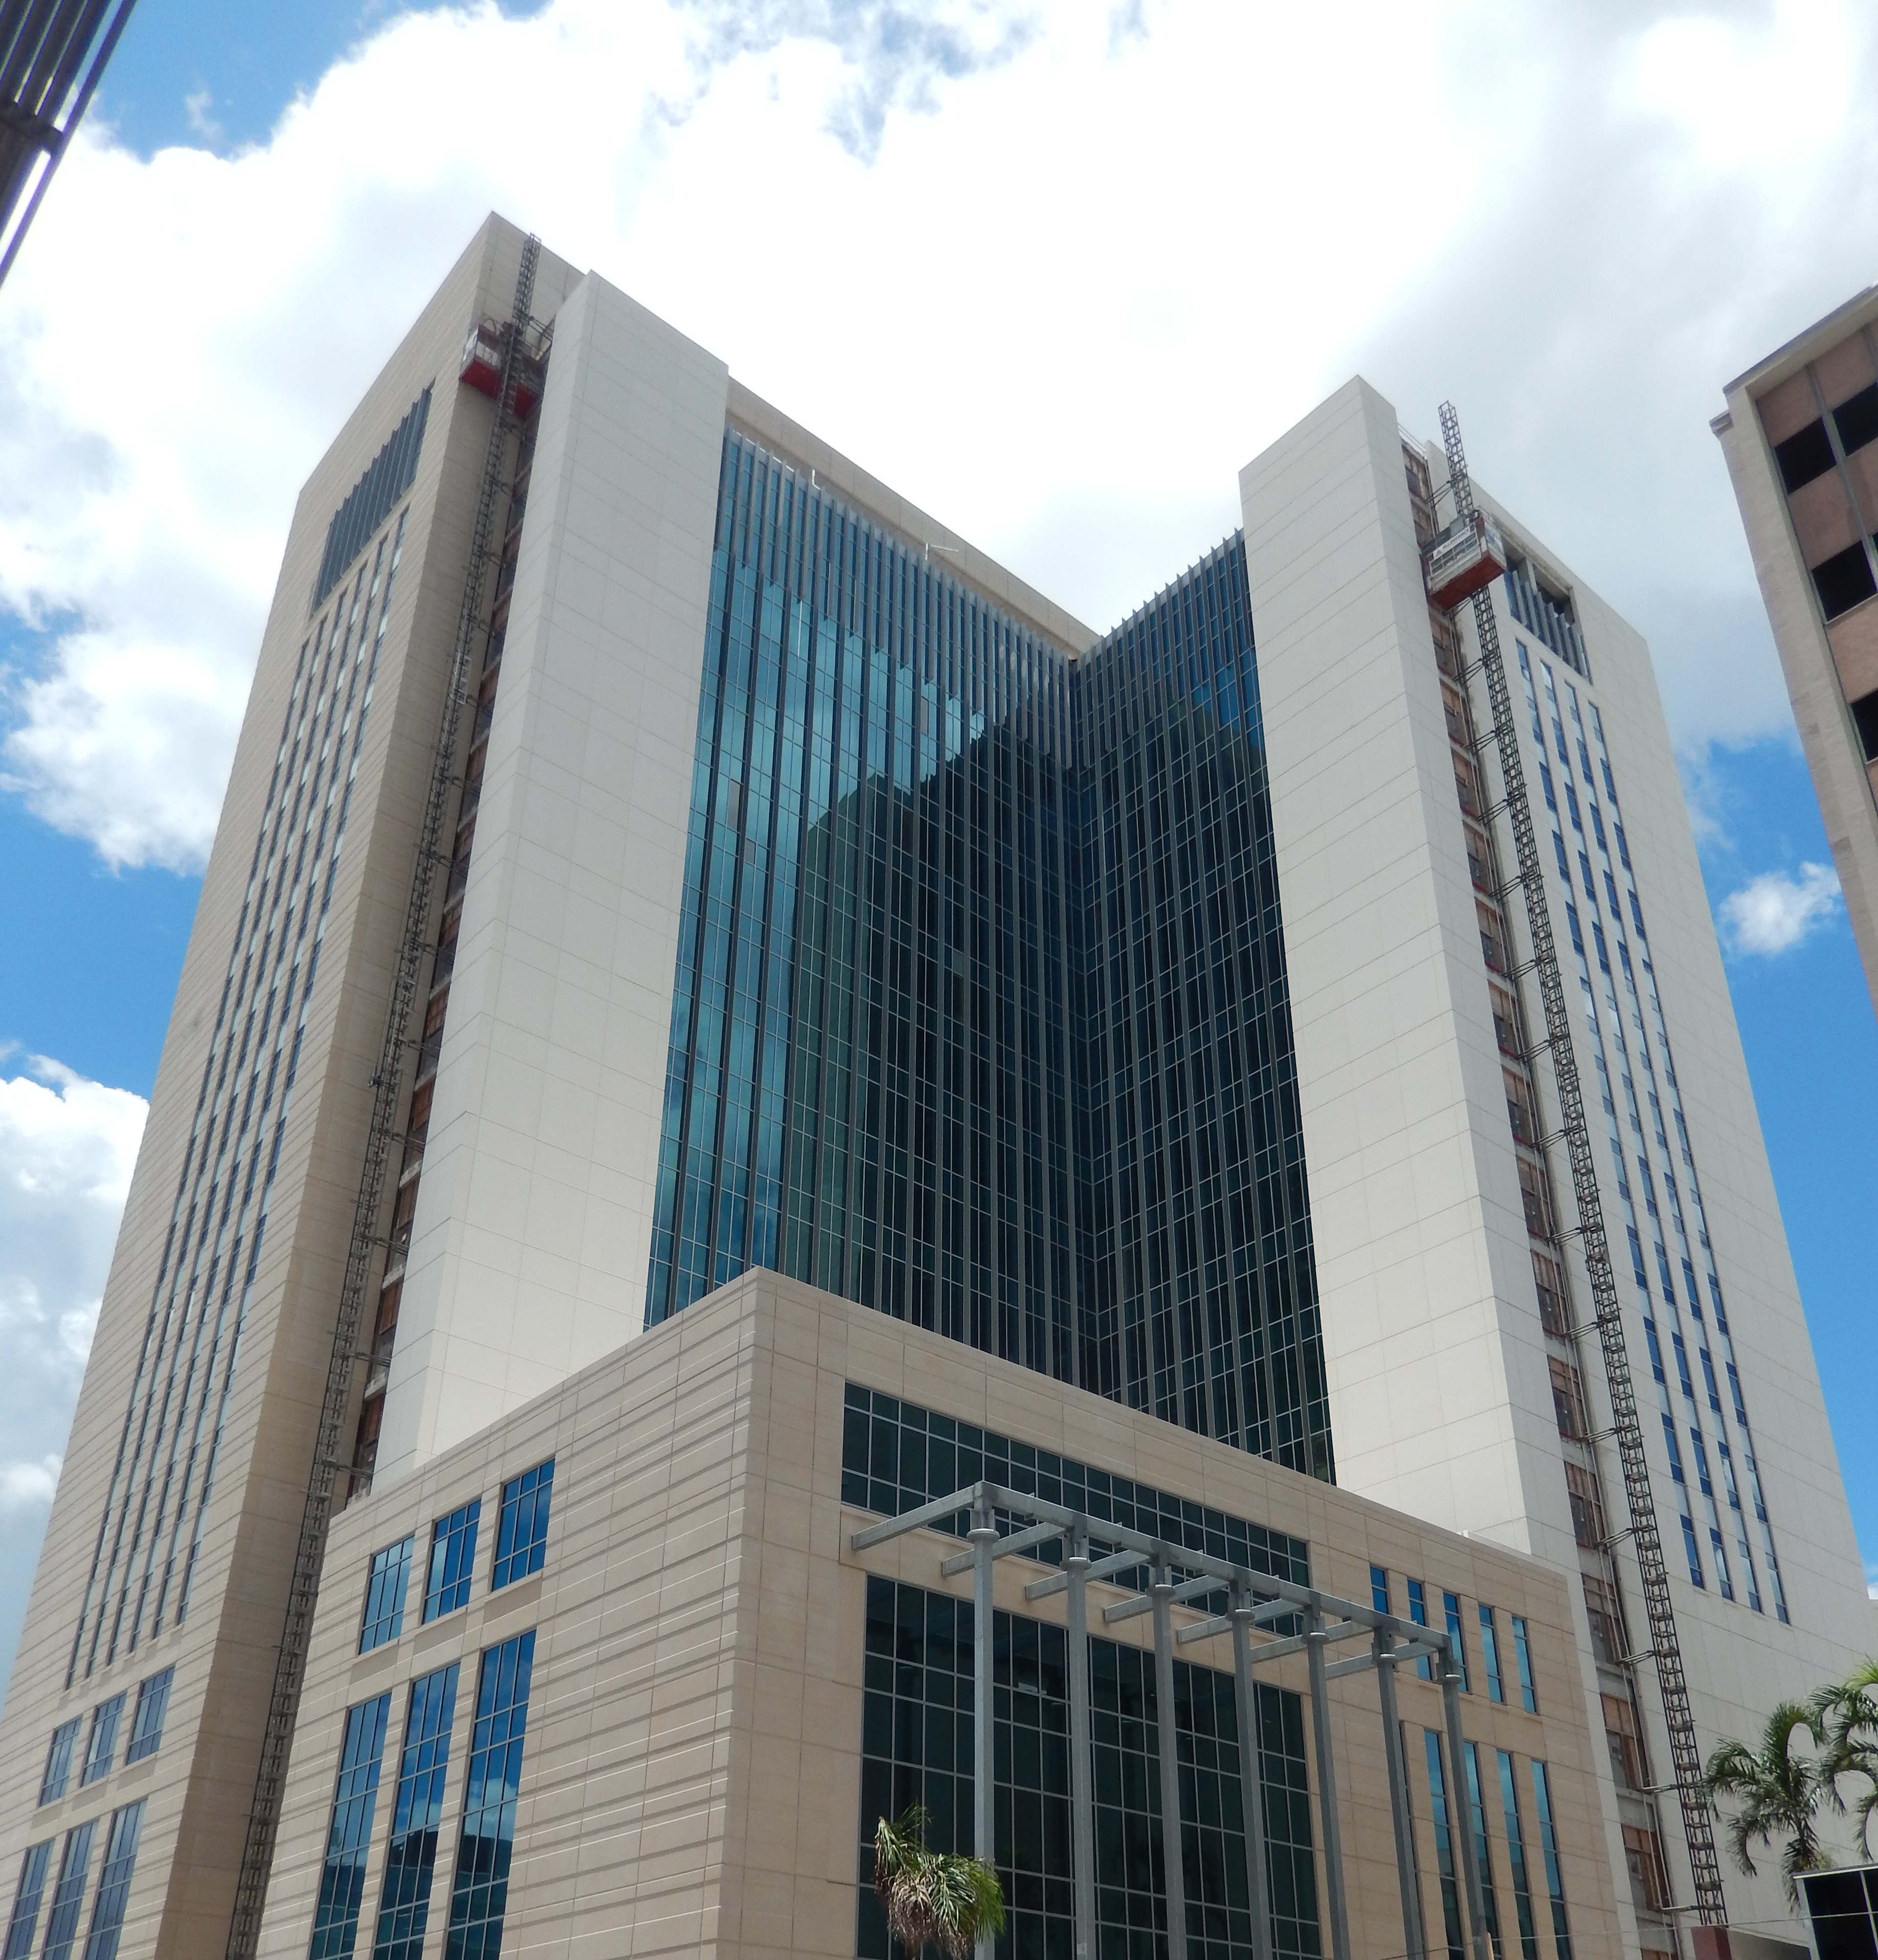 Project name: New Broward County Courthouse